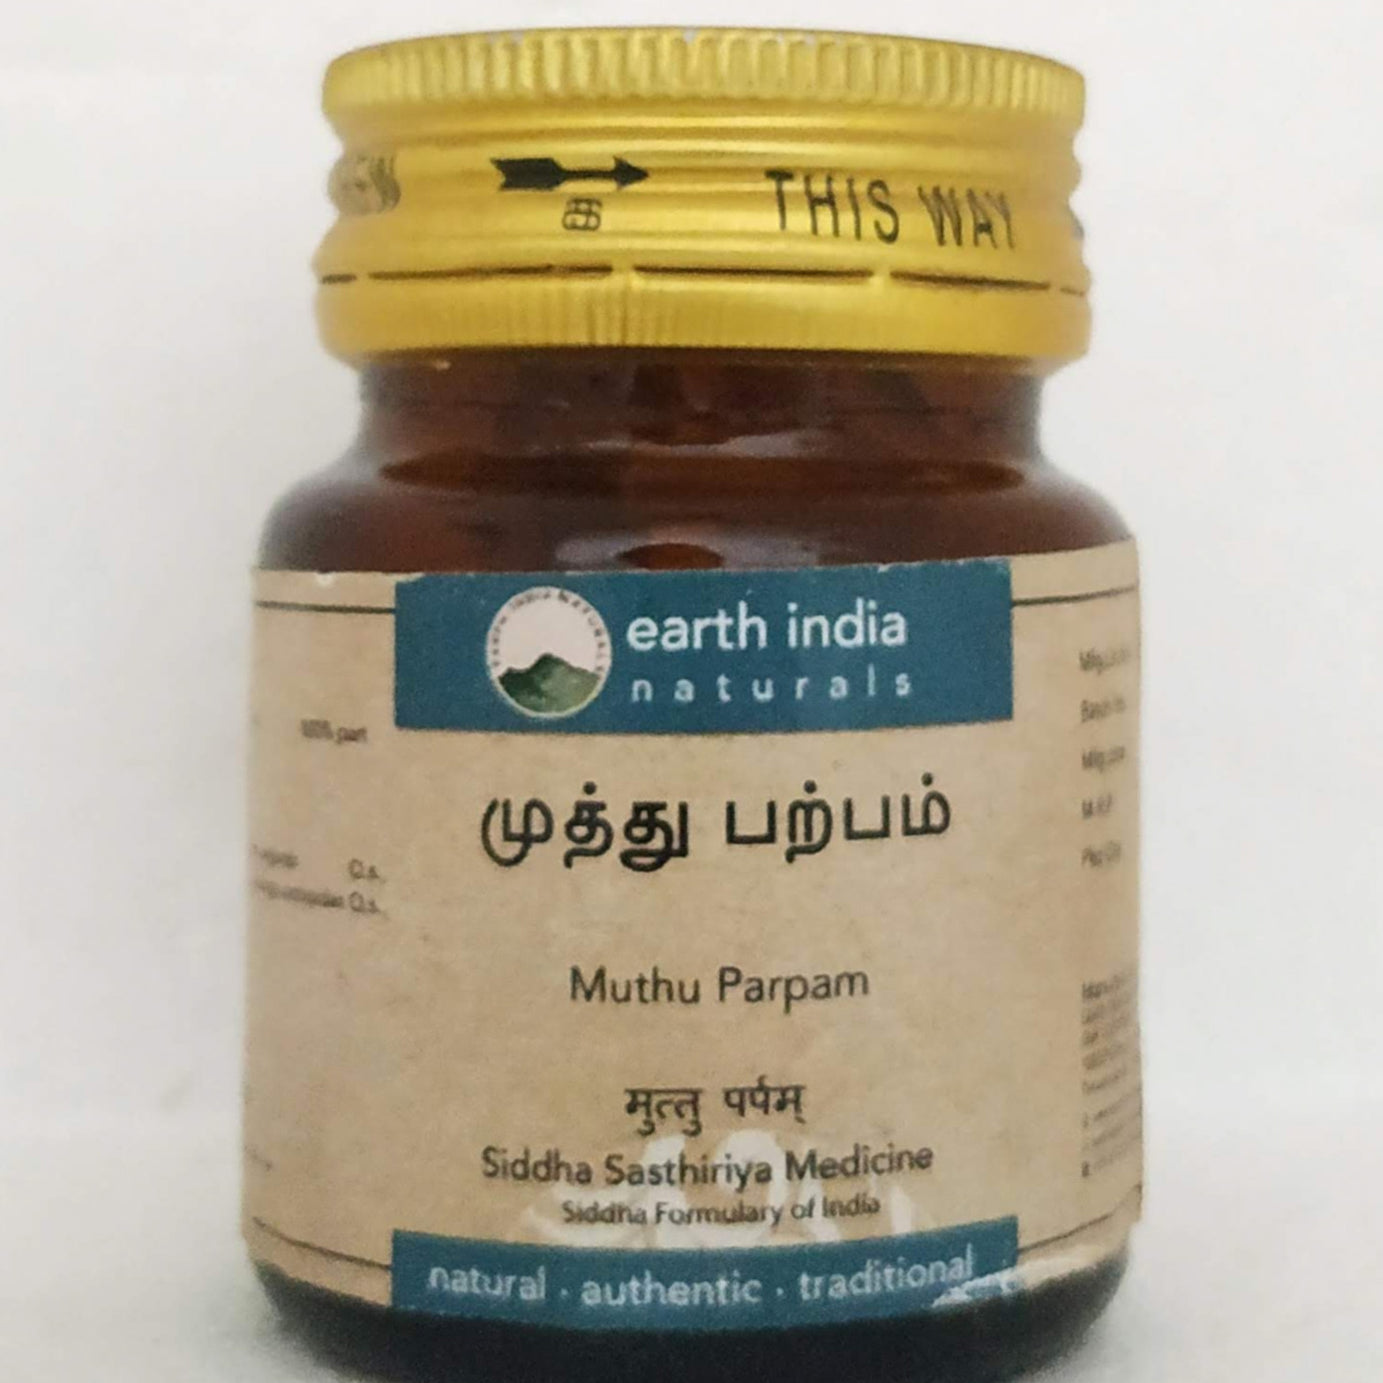 Shop Muthu parpam 2gm at price 162.00 from Earth India Online - Ayush Care